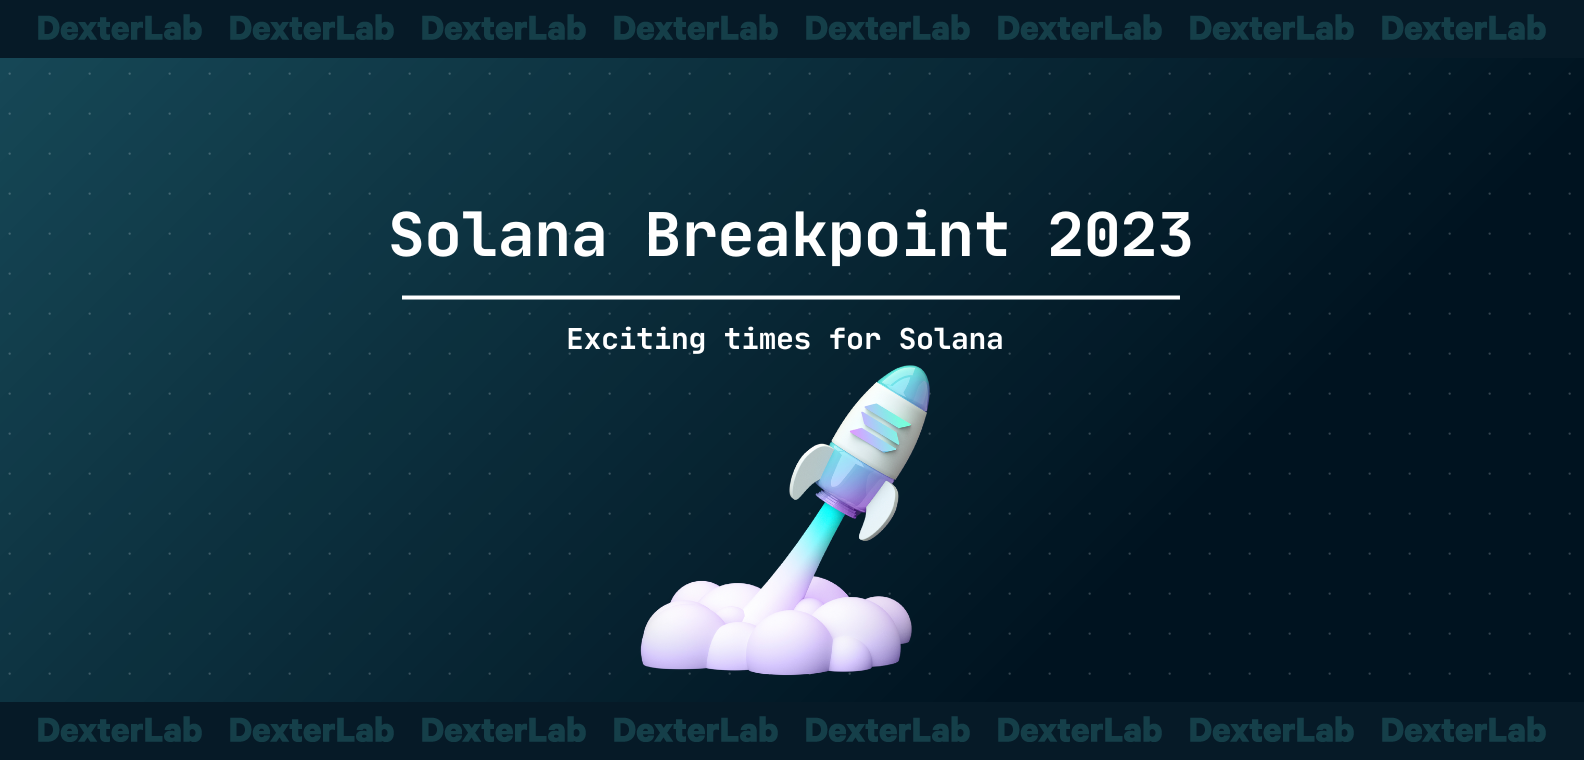 Breakpoint 2023: Solana Price Surges